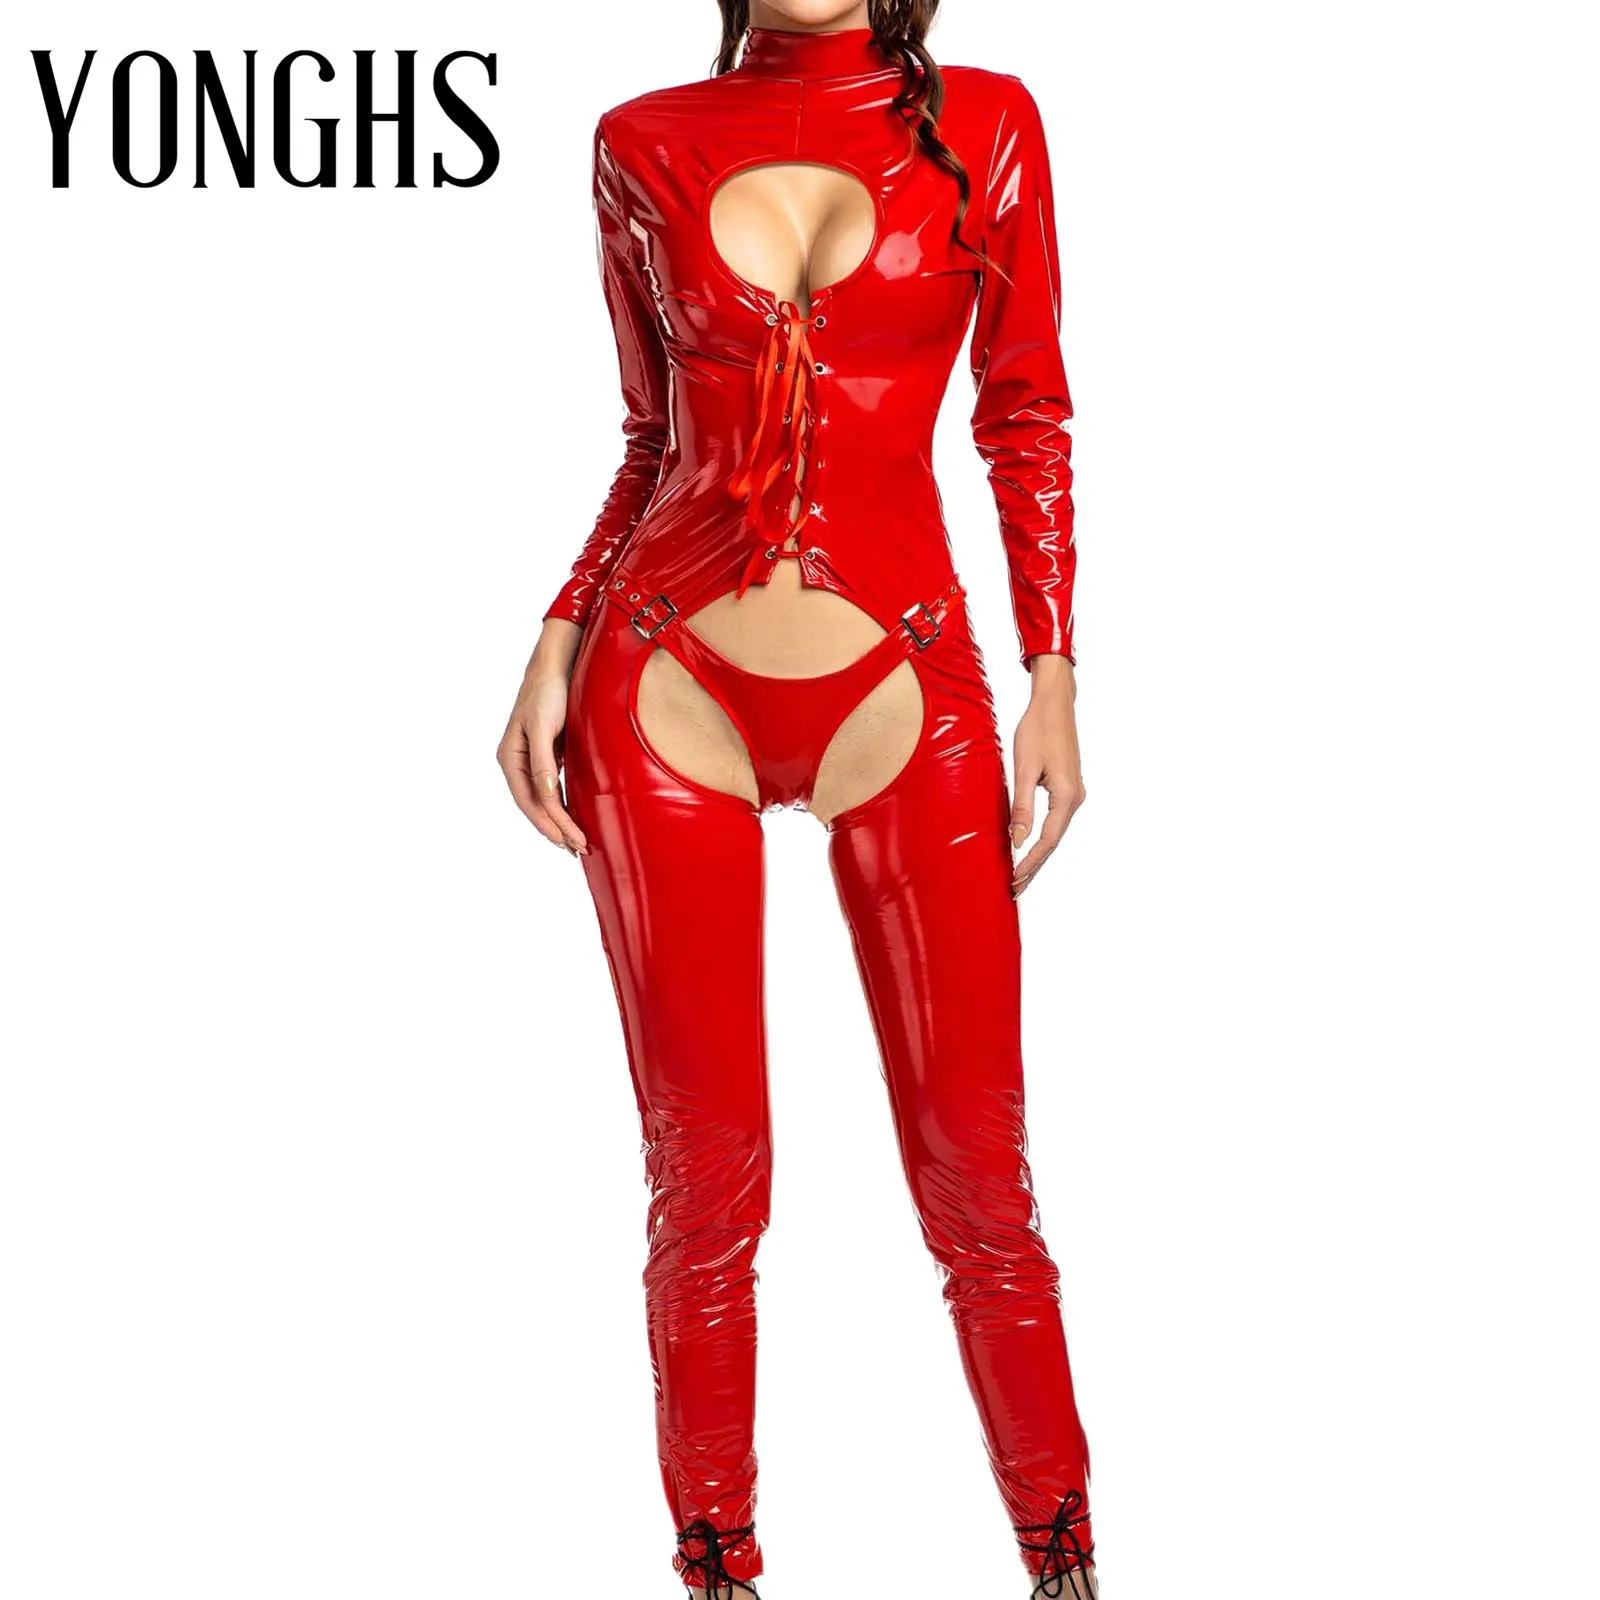 

Womens Erotic Patent Leather Teddies Bodysuit Keyhole Lace-up Front Crotchless Romper High Neck Long Sleeve Open Butt Bodycon